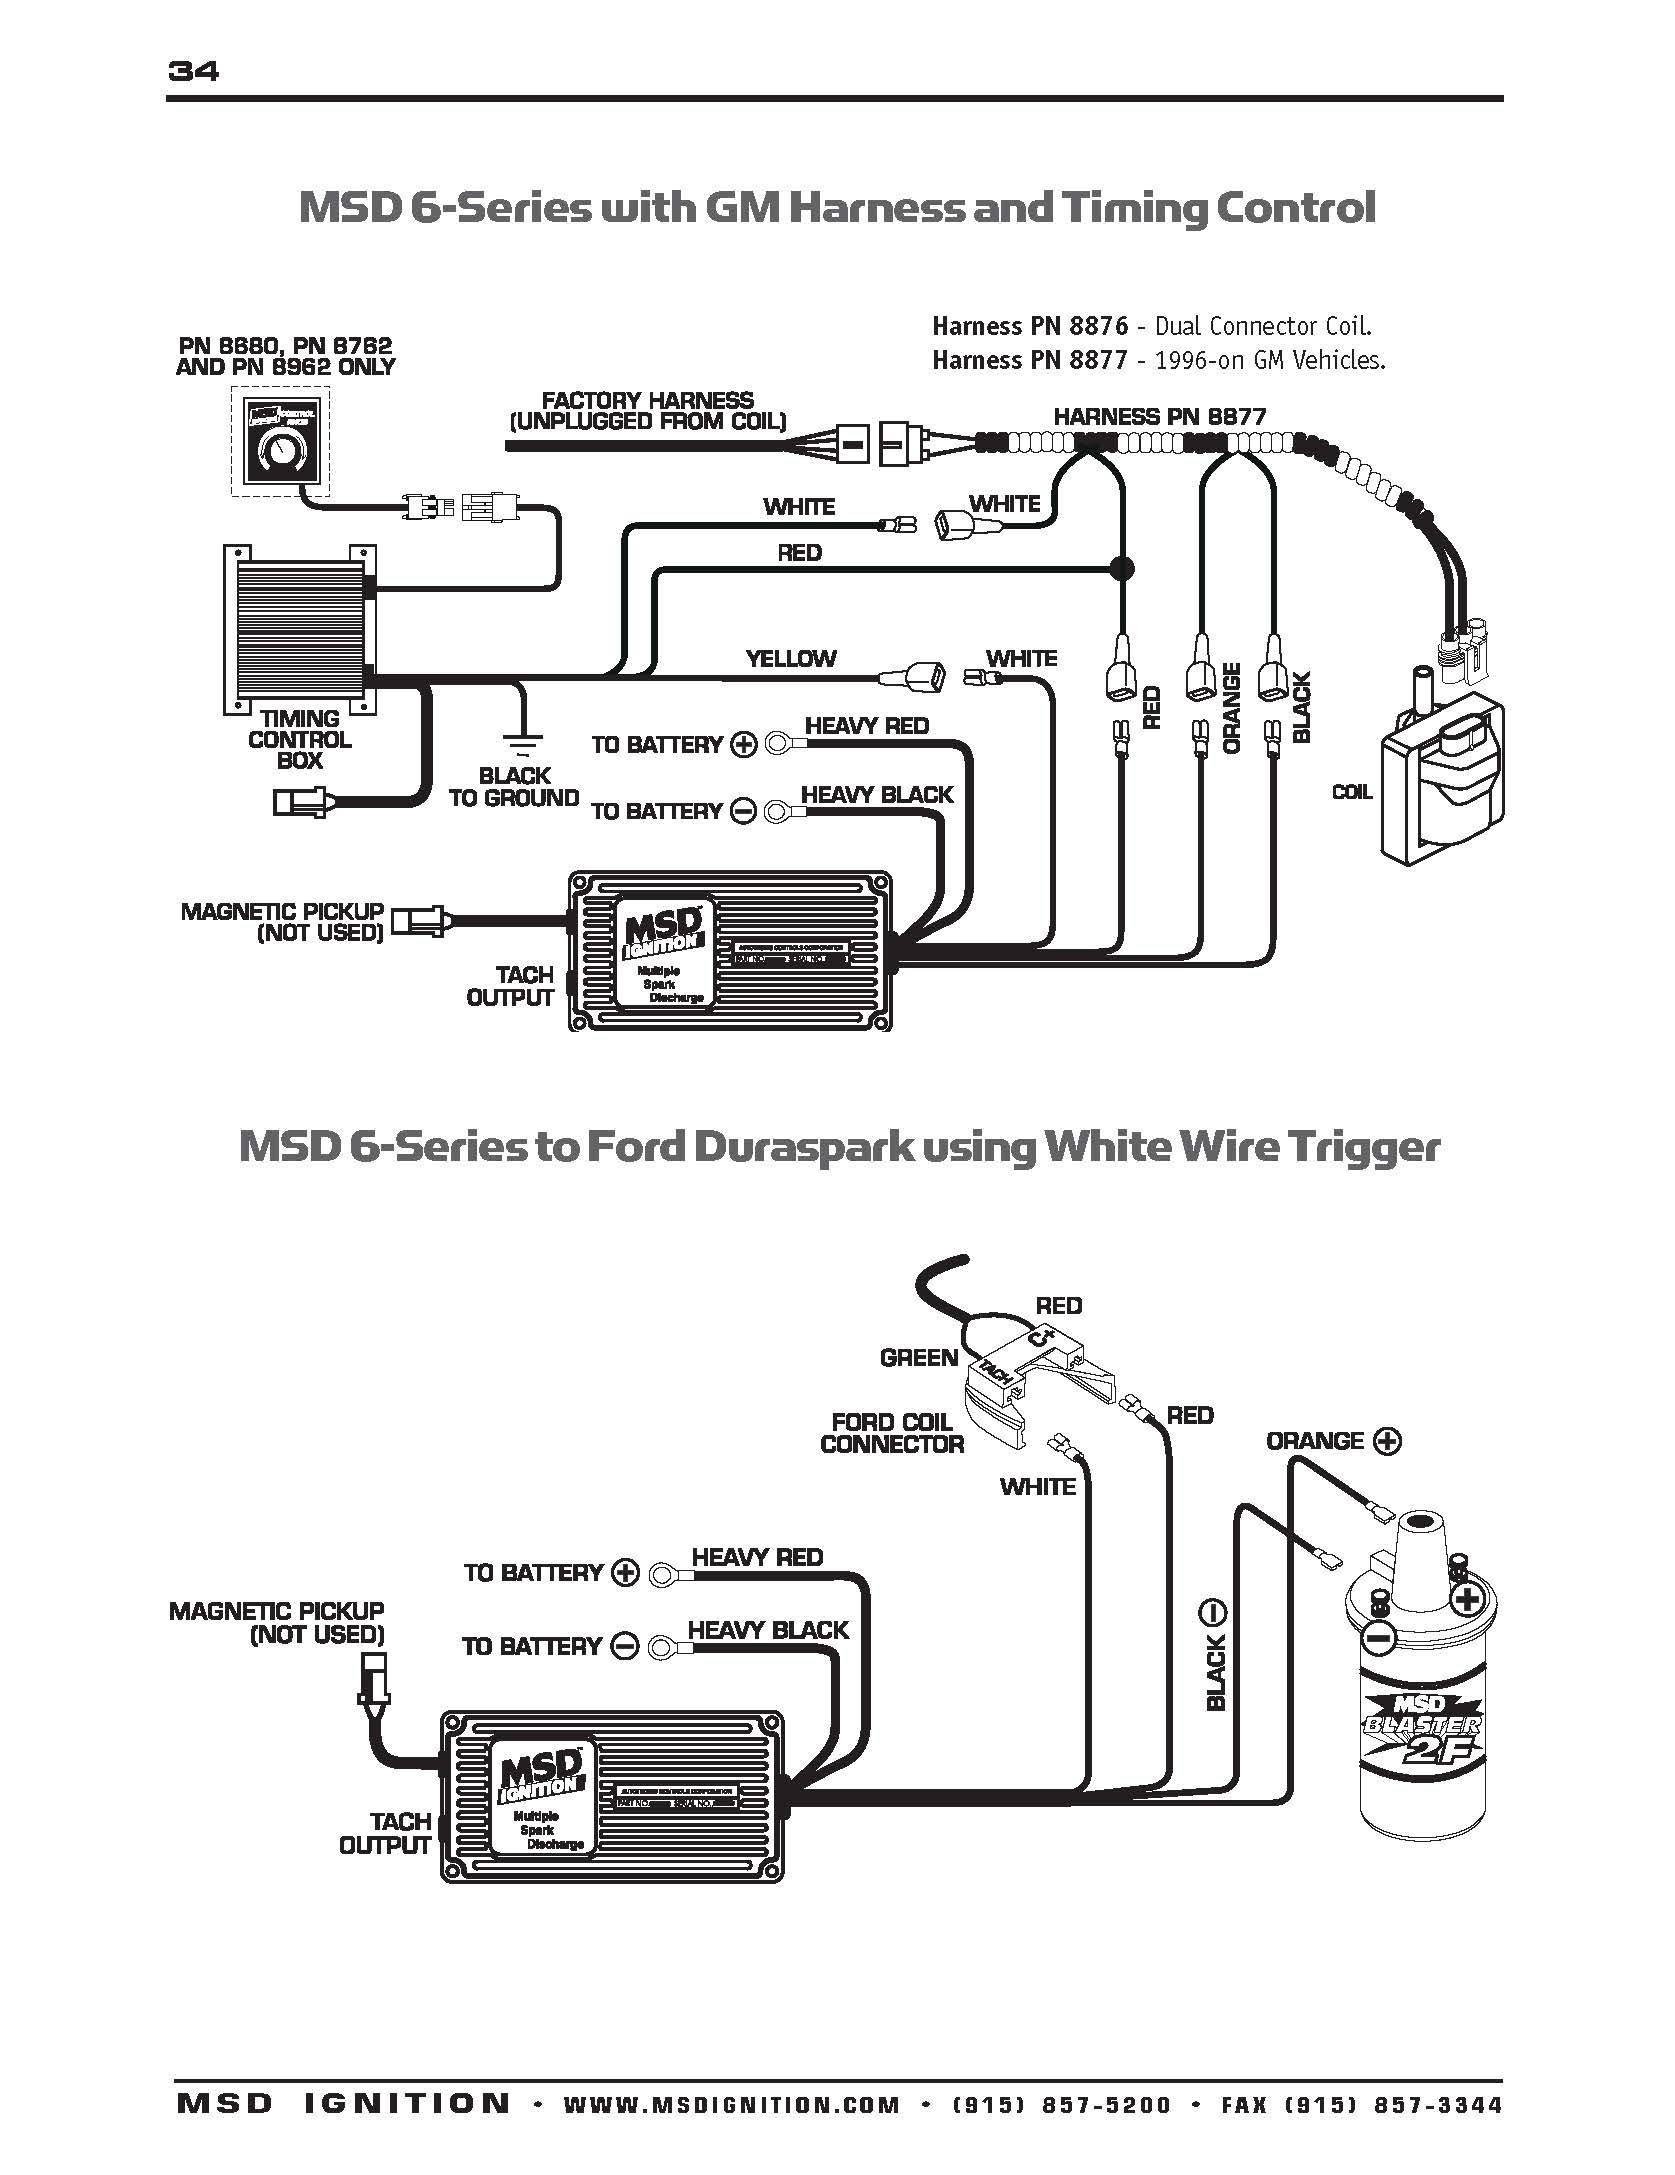 Msd Ignition Wiring Diagram Awesome ford Ignition Coil Wiring Diagram Lovely 350 Chevy Msd Ignition